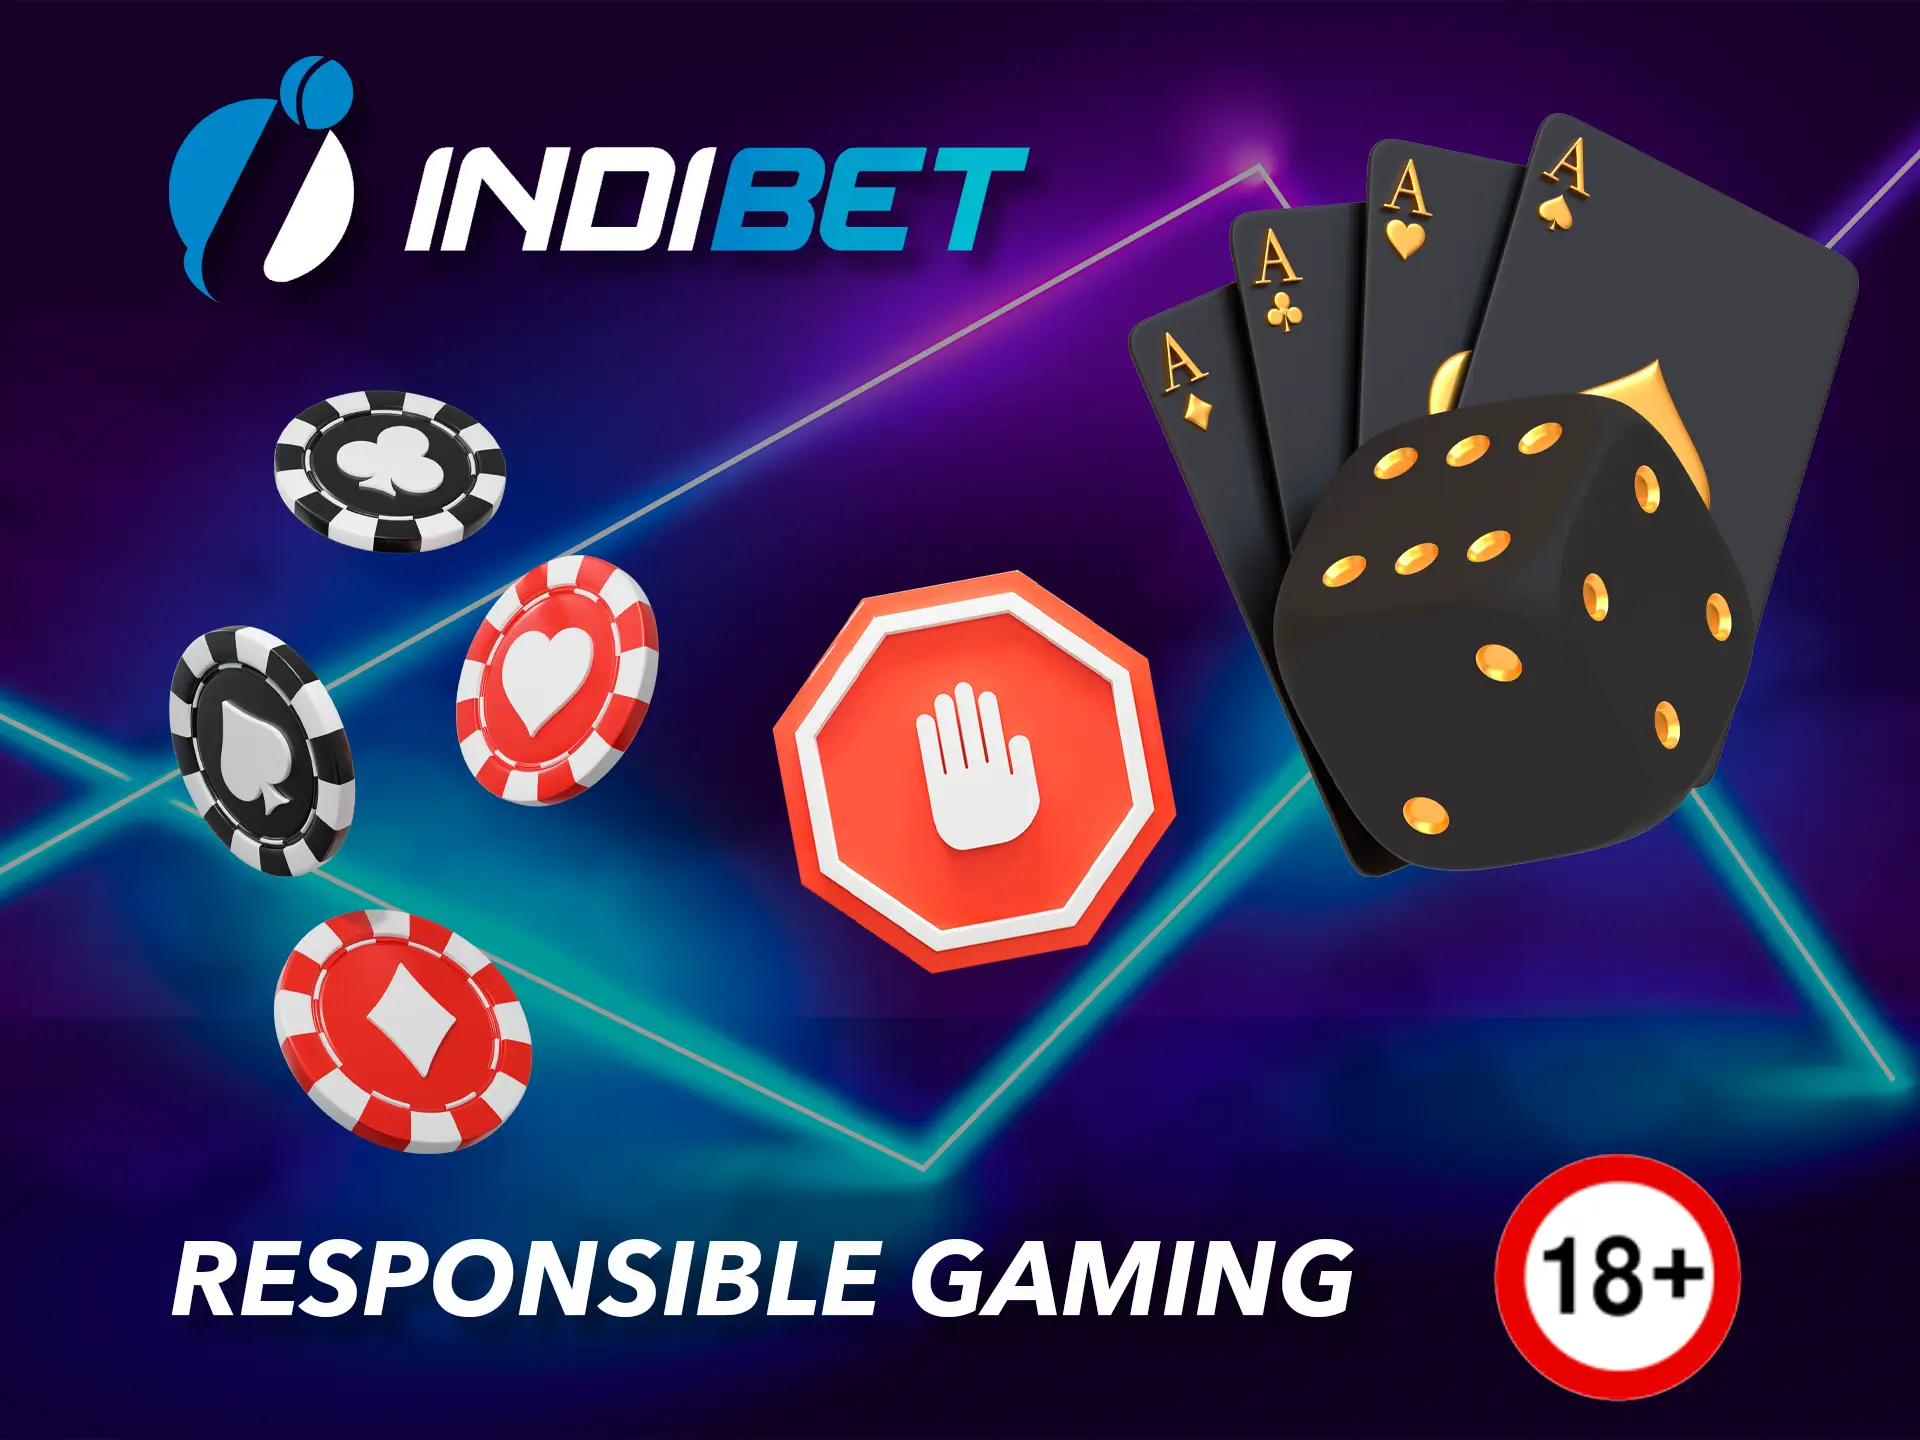 Don't forget to take a break and remember that Indibet Casino is first and foremost a game of fun.